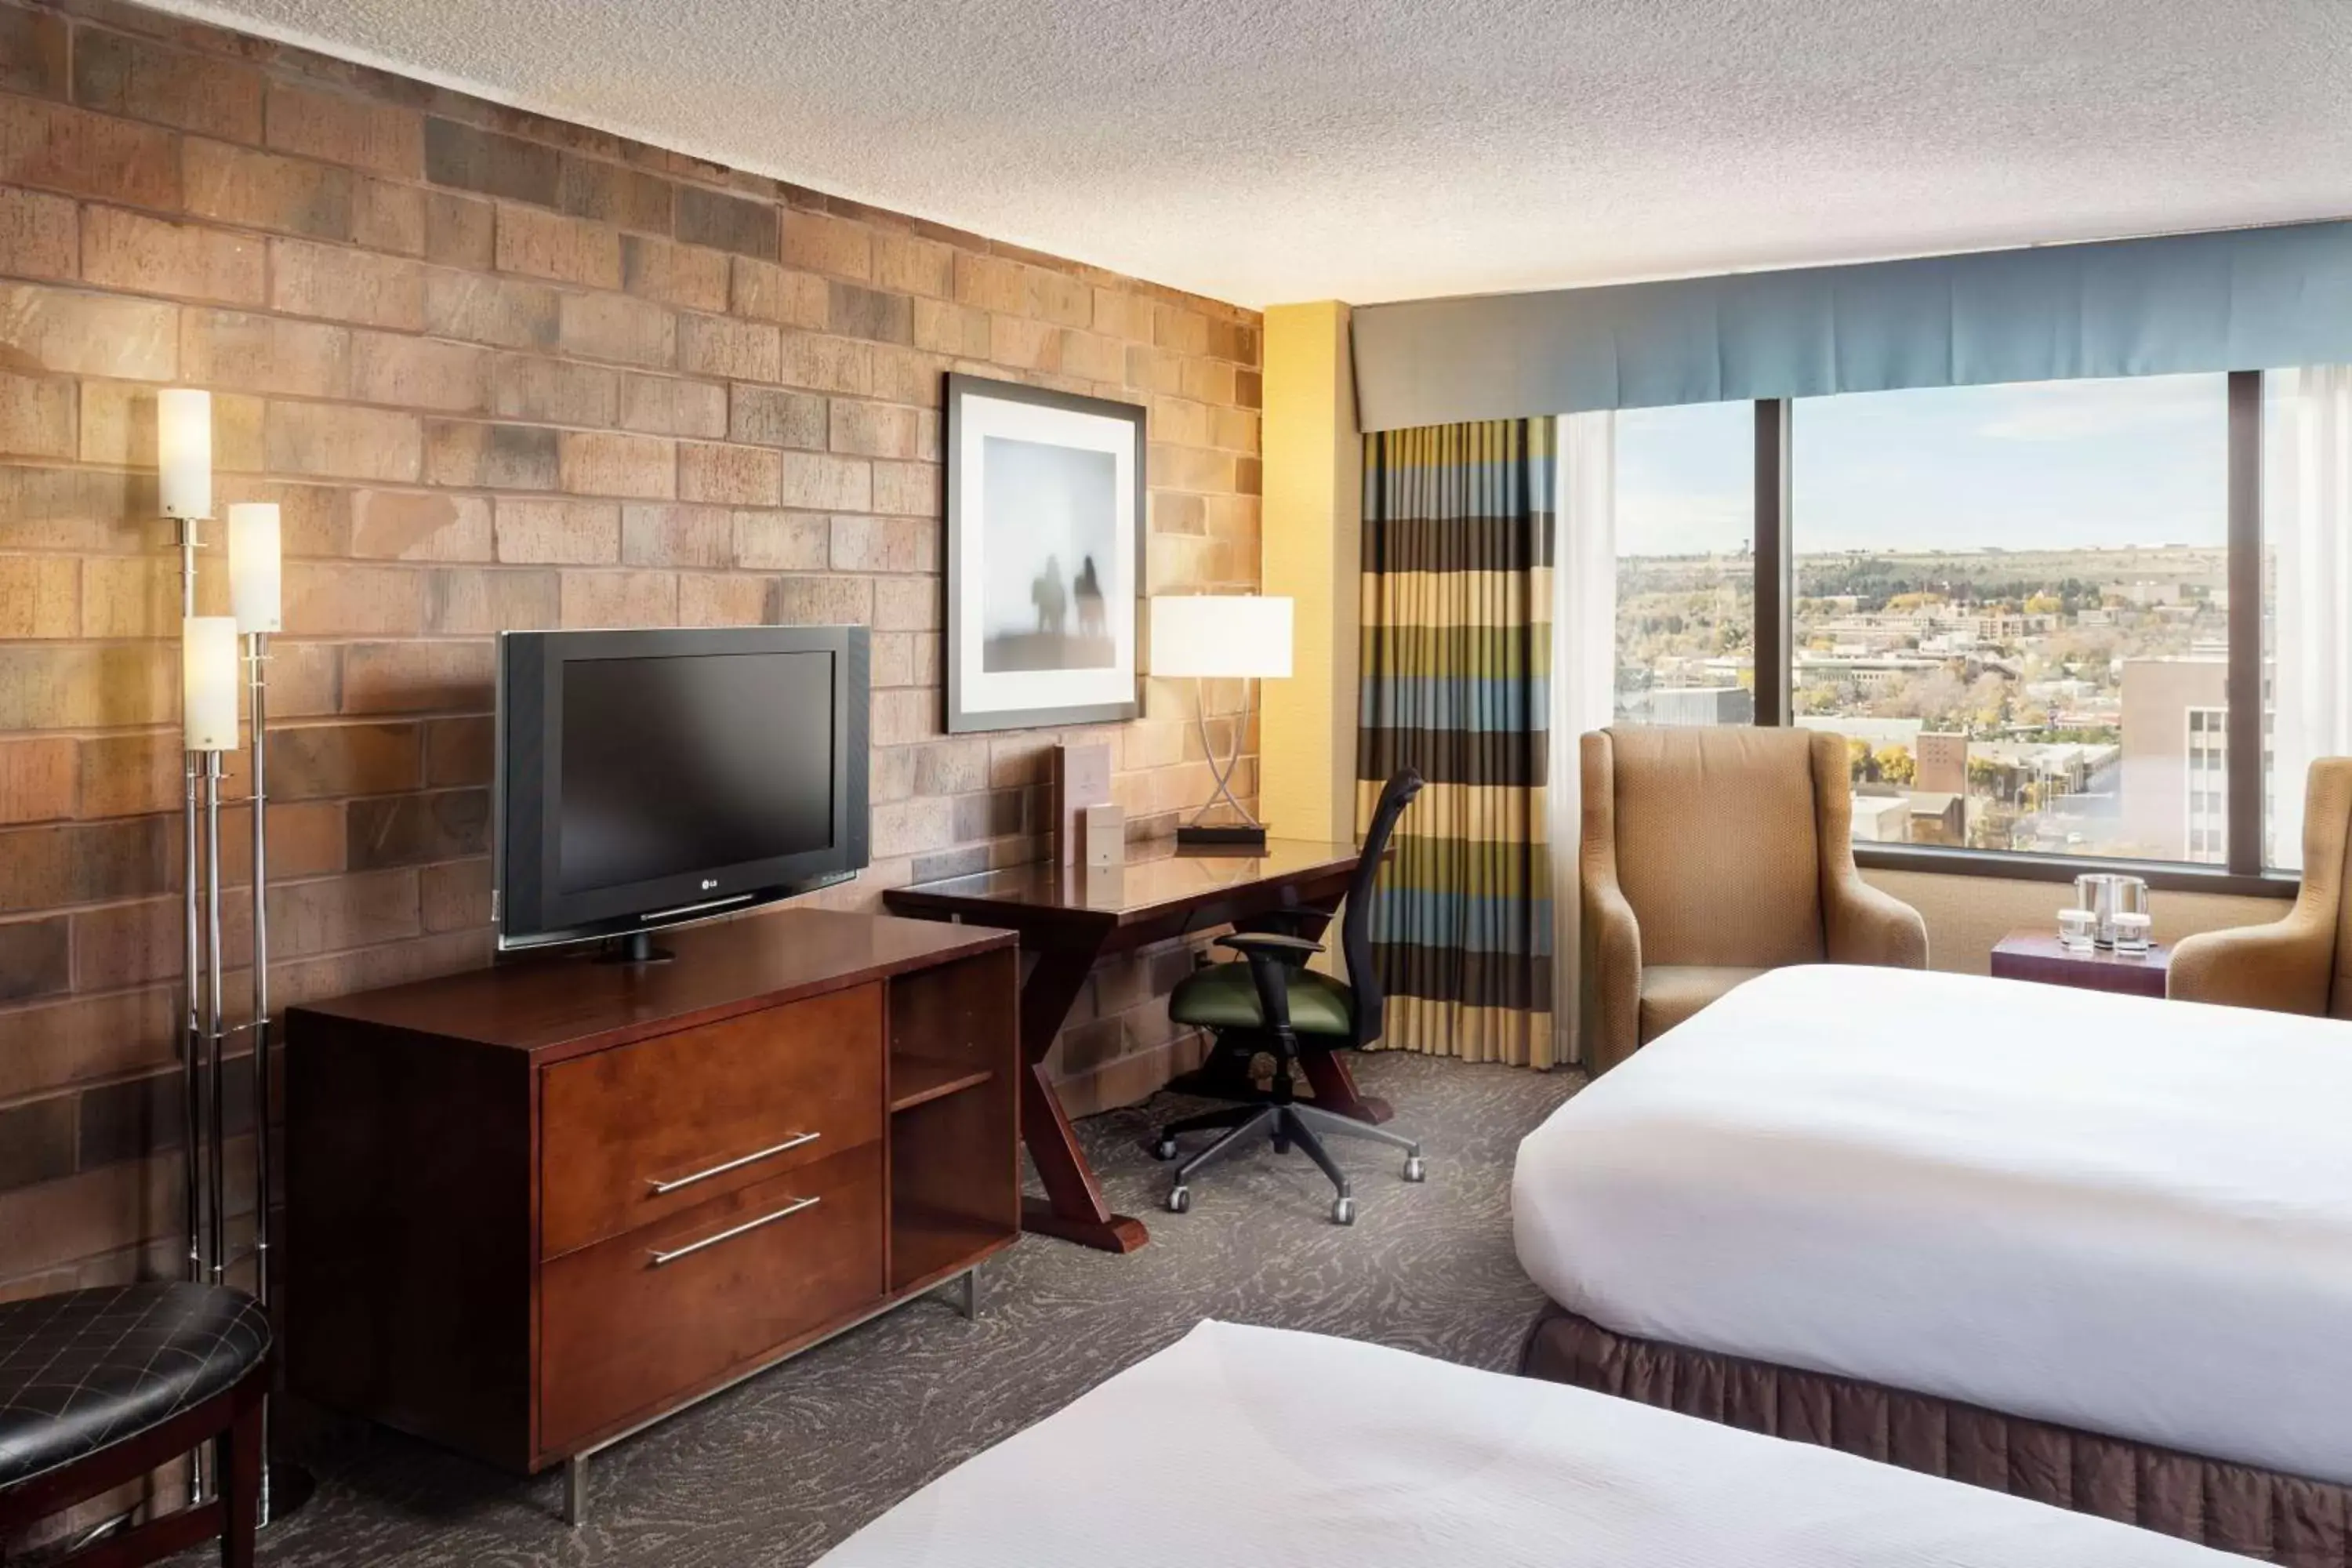 Bedroom, TV/Entertainment Center in Doubletree By Hilton Billings